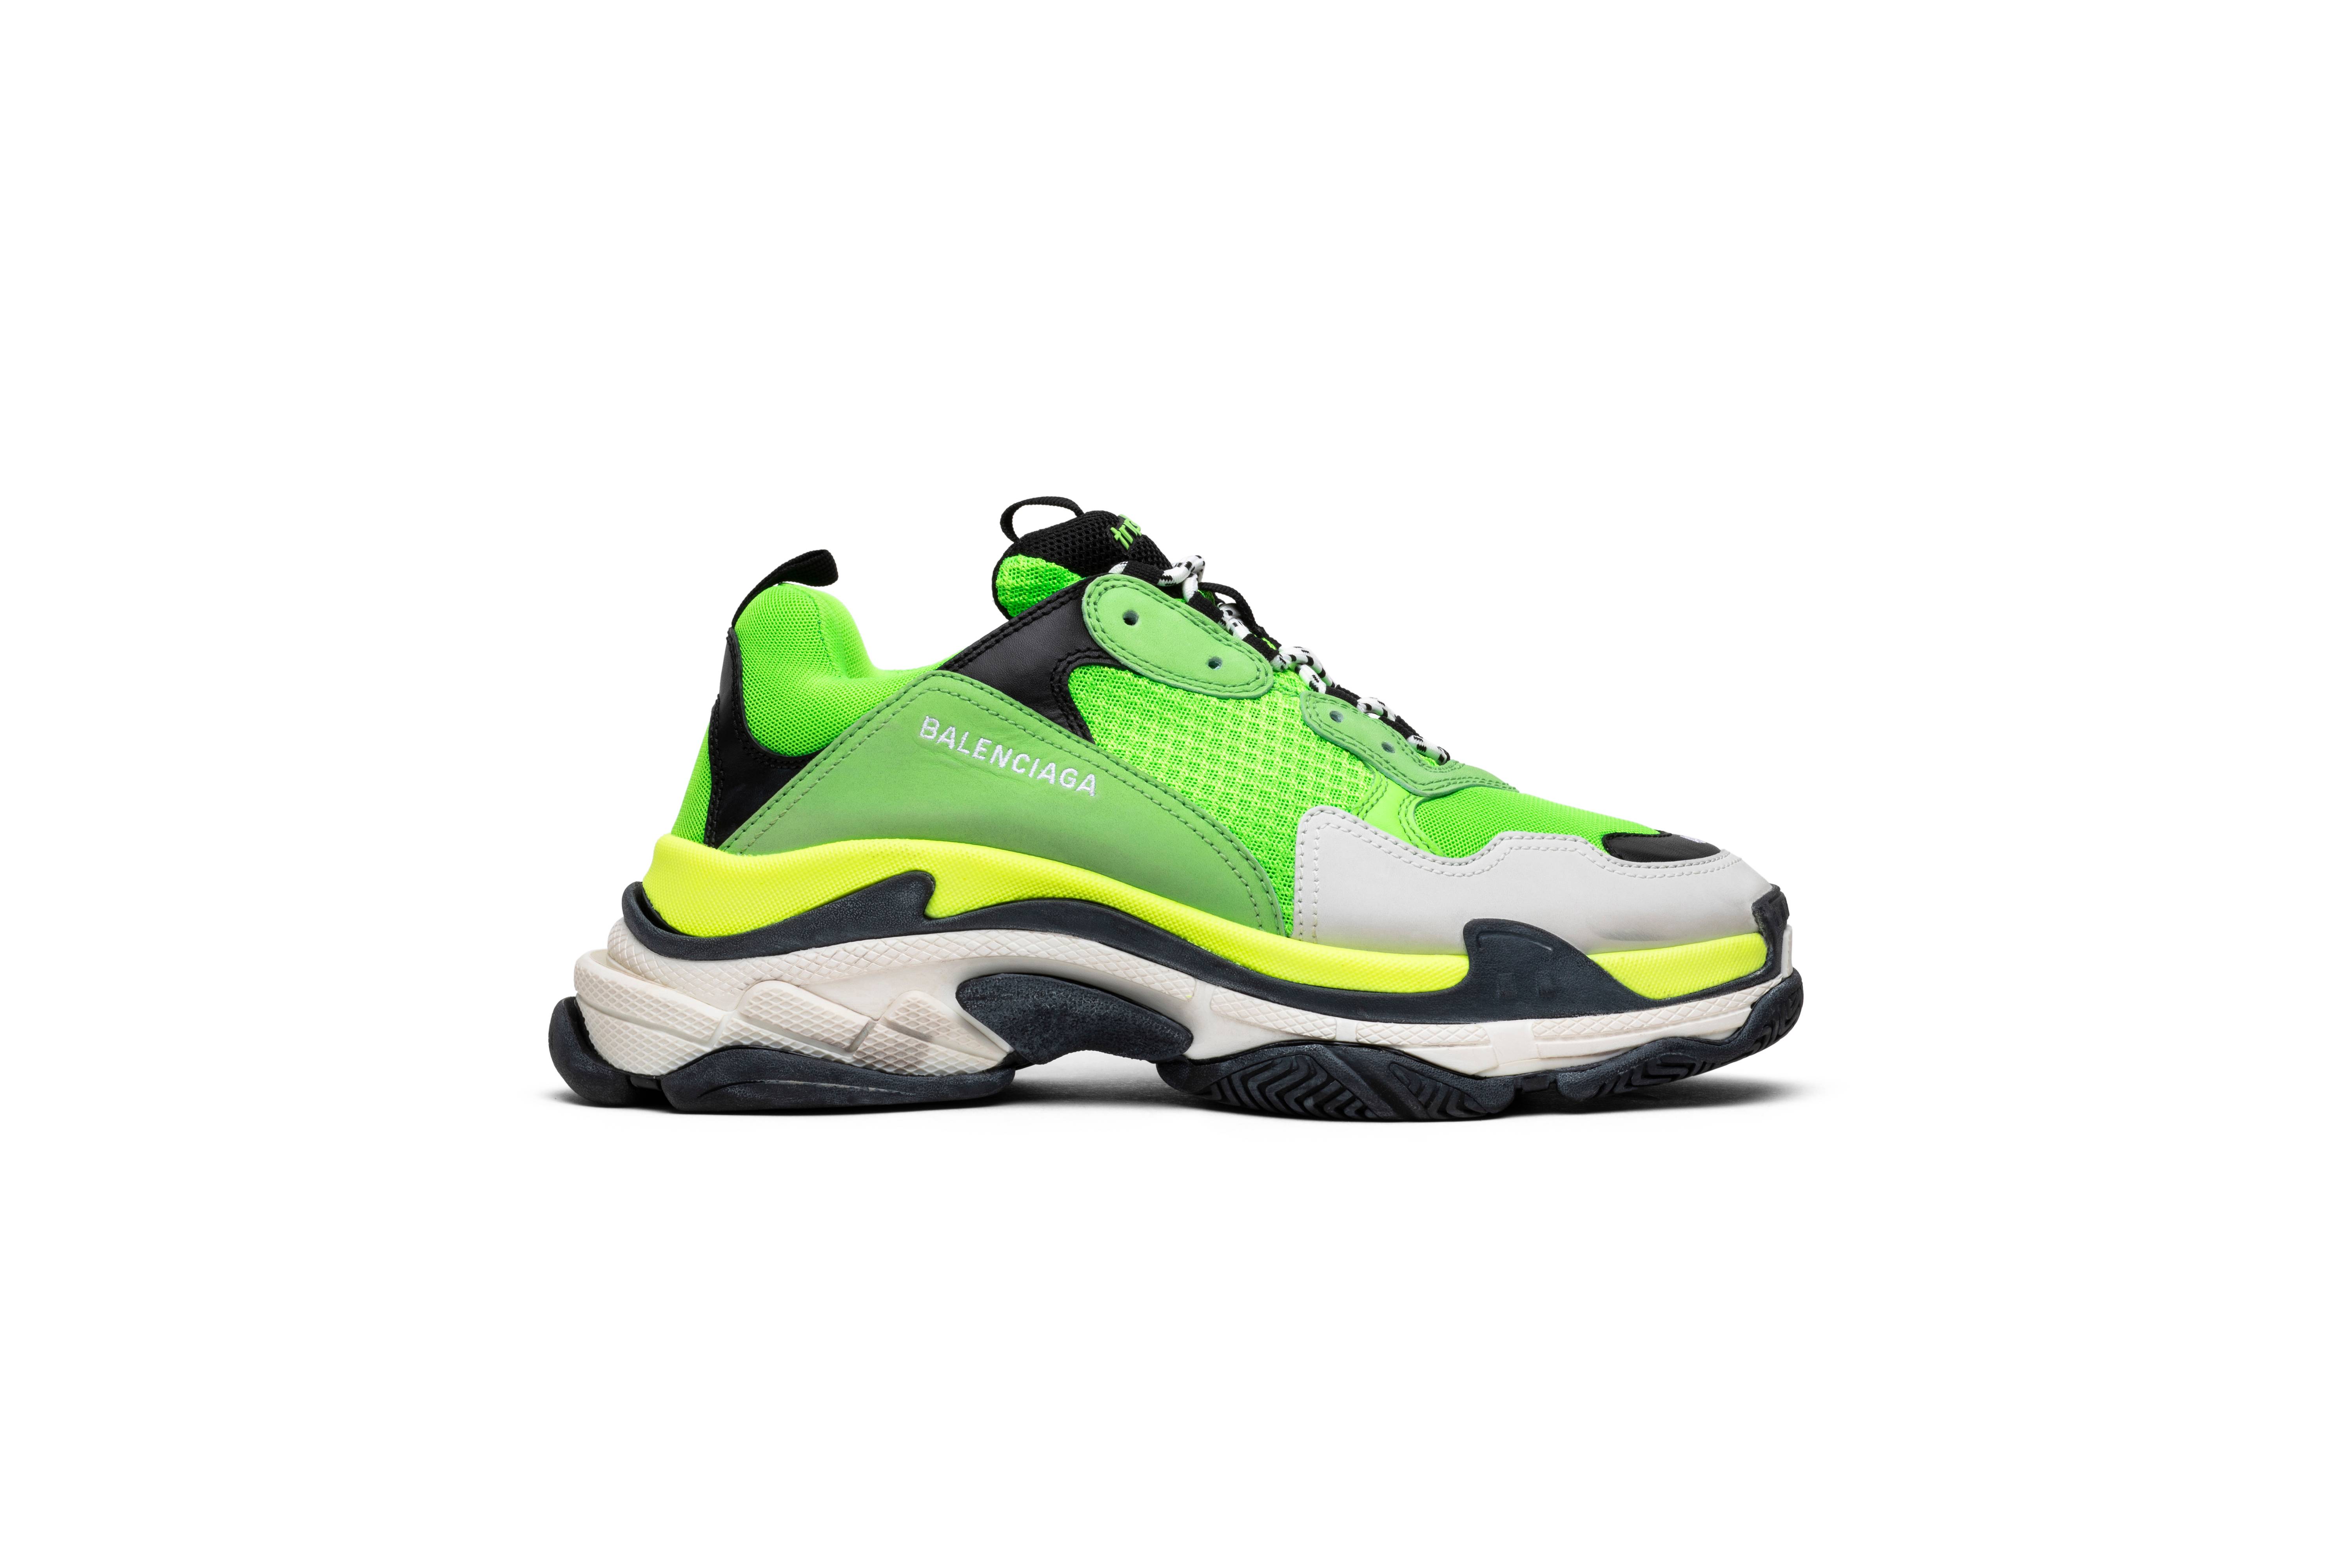 Balenciaga Mens Triple S TrainersSneakers in Fluorescent Yellow  2018  Release Unboxing  Tryon  YouTube